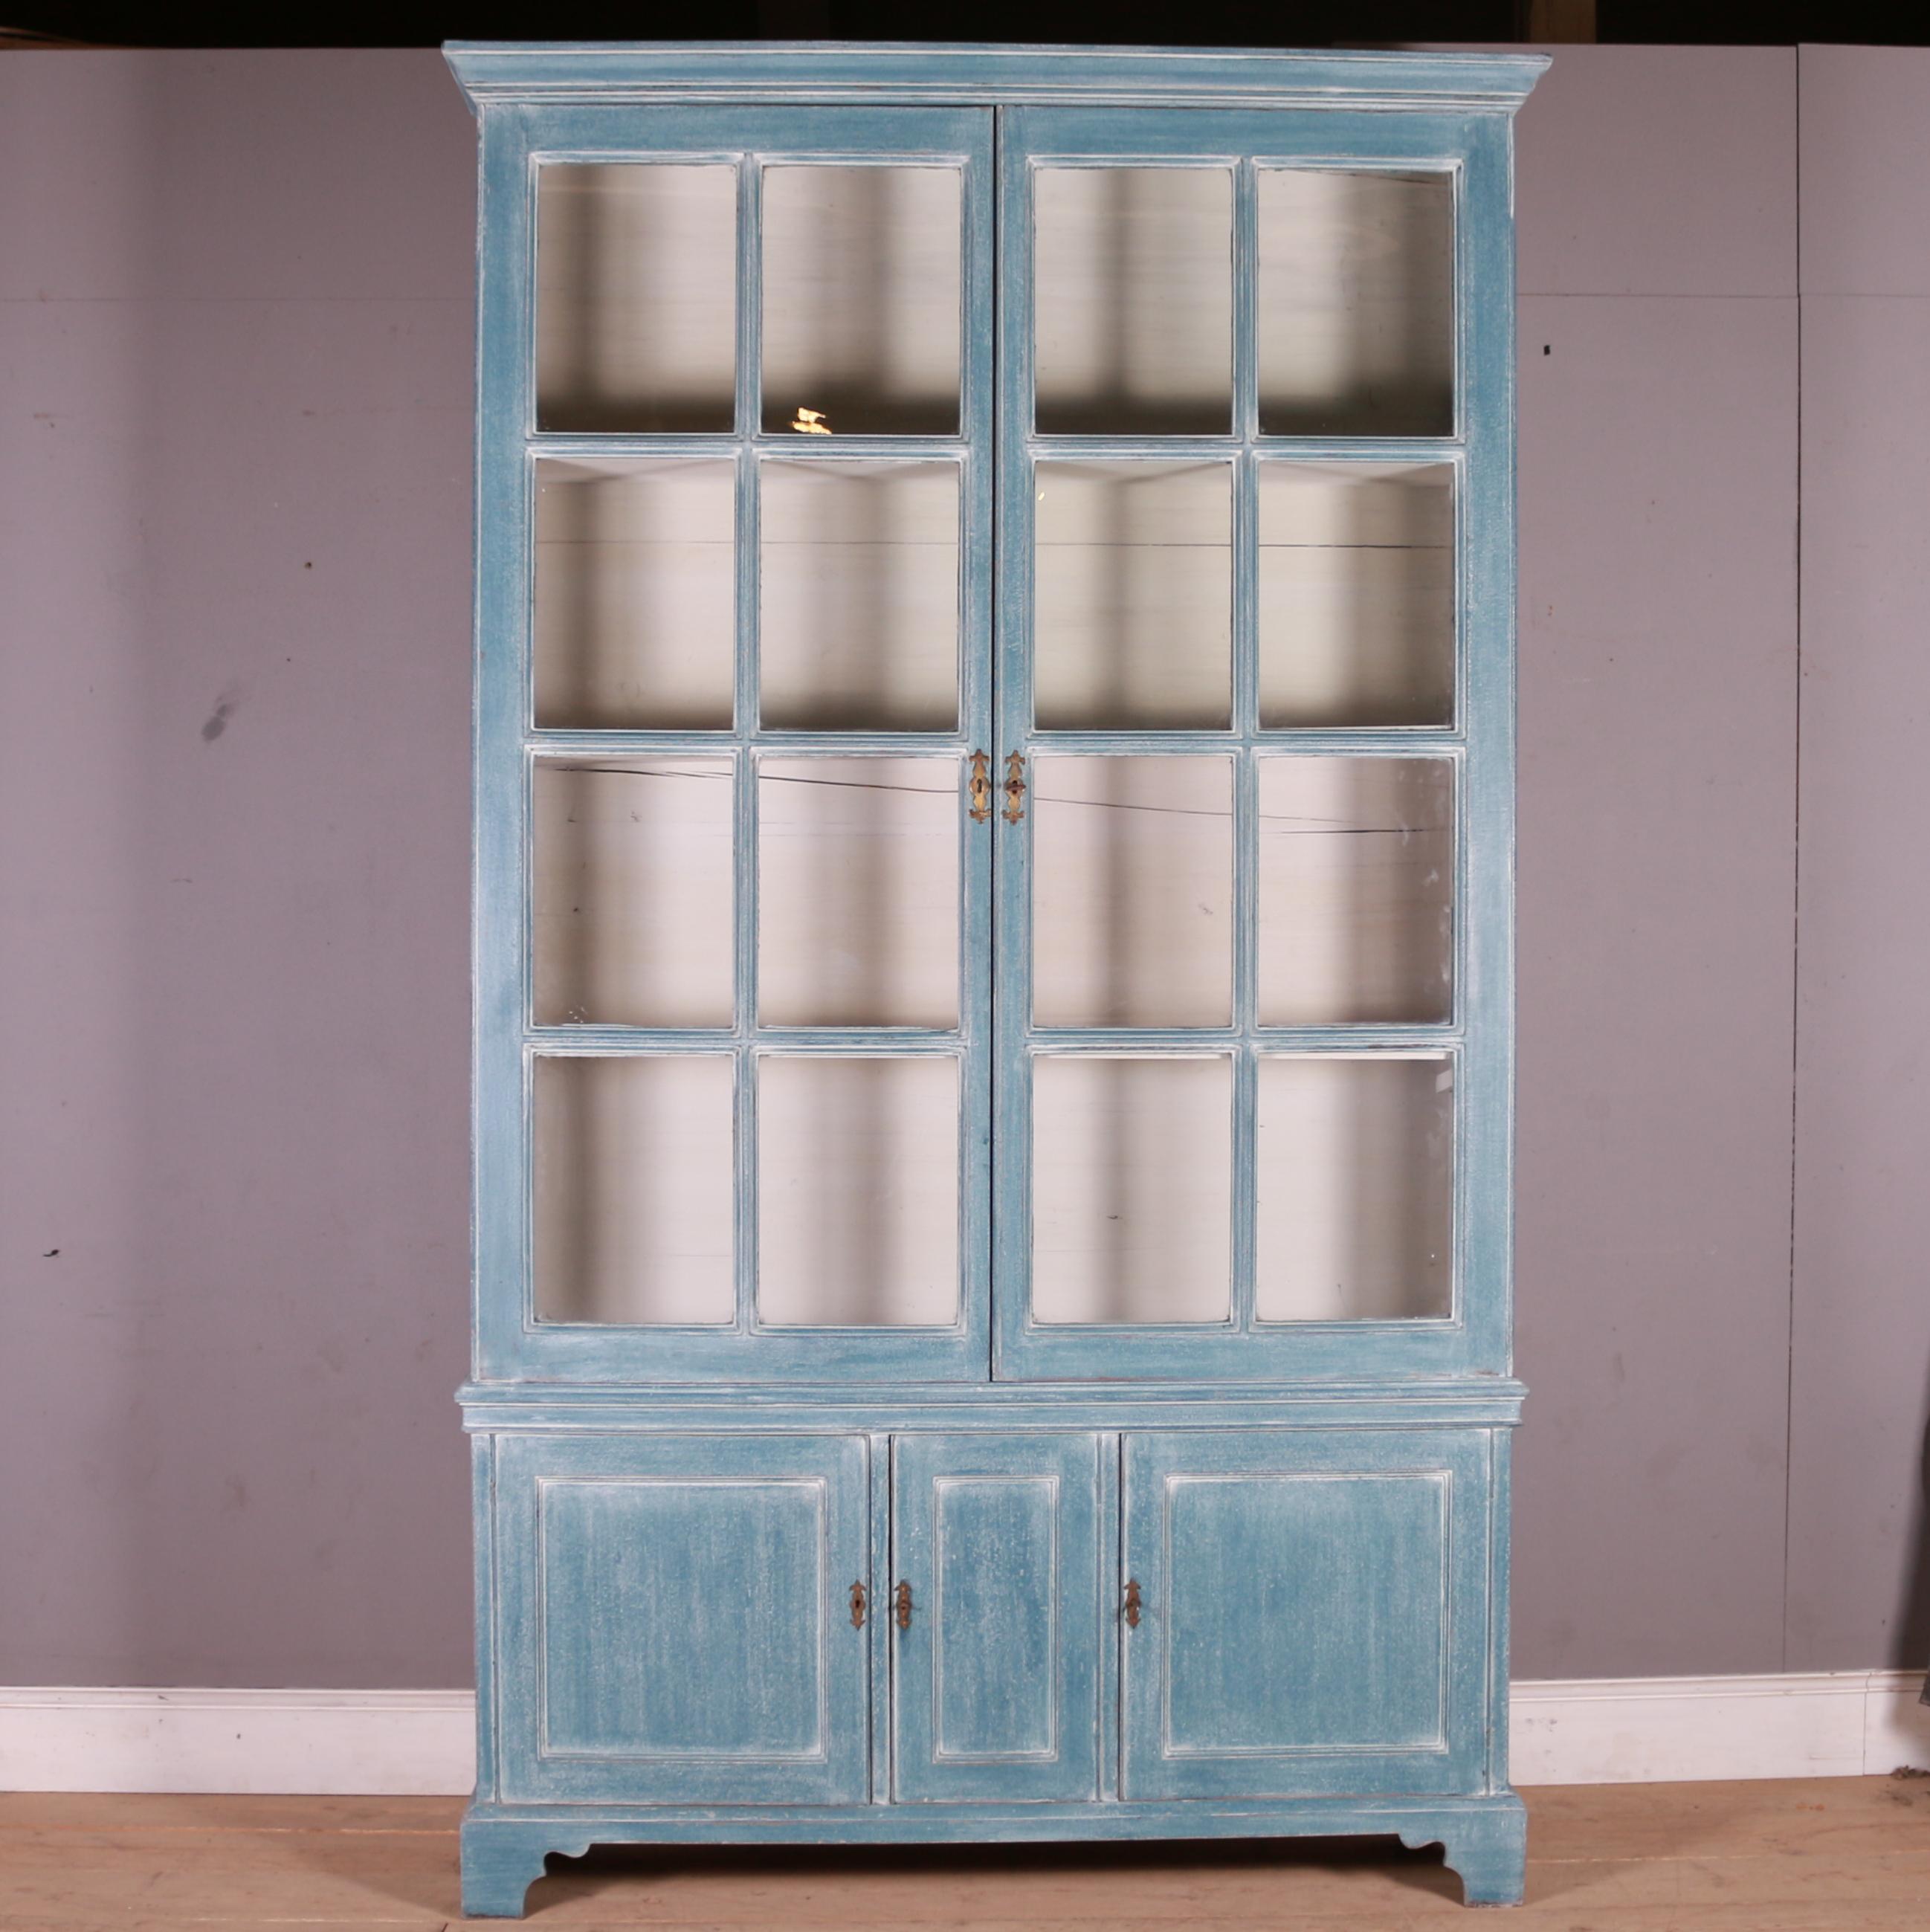 Large early 19th C English painted pine library bookcase with adjustable shelves. The bookcase comes with one extra shelf. Great bold design. 1820.

The top section does come off the base for transport and delivery

Shelf depth -